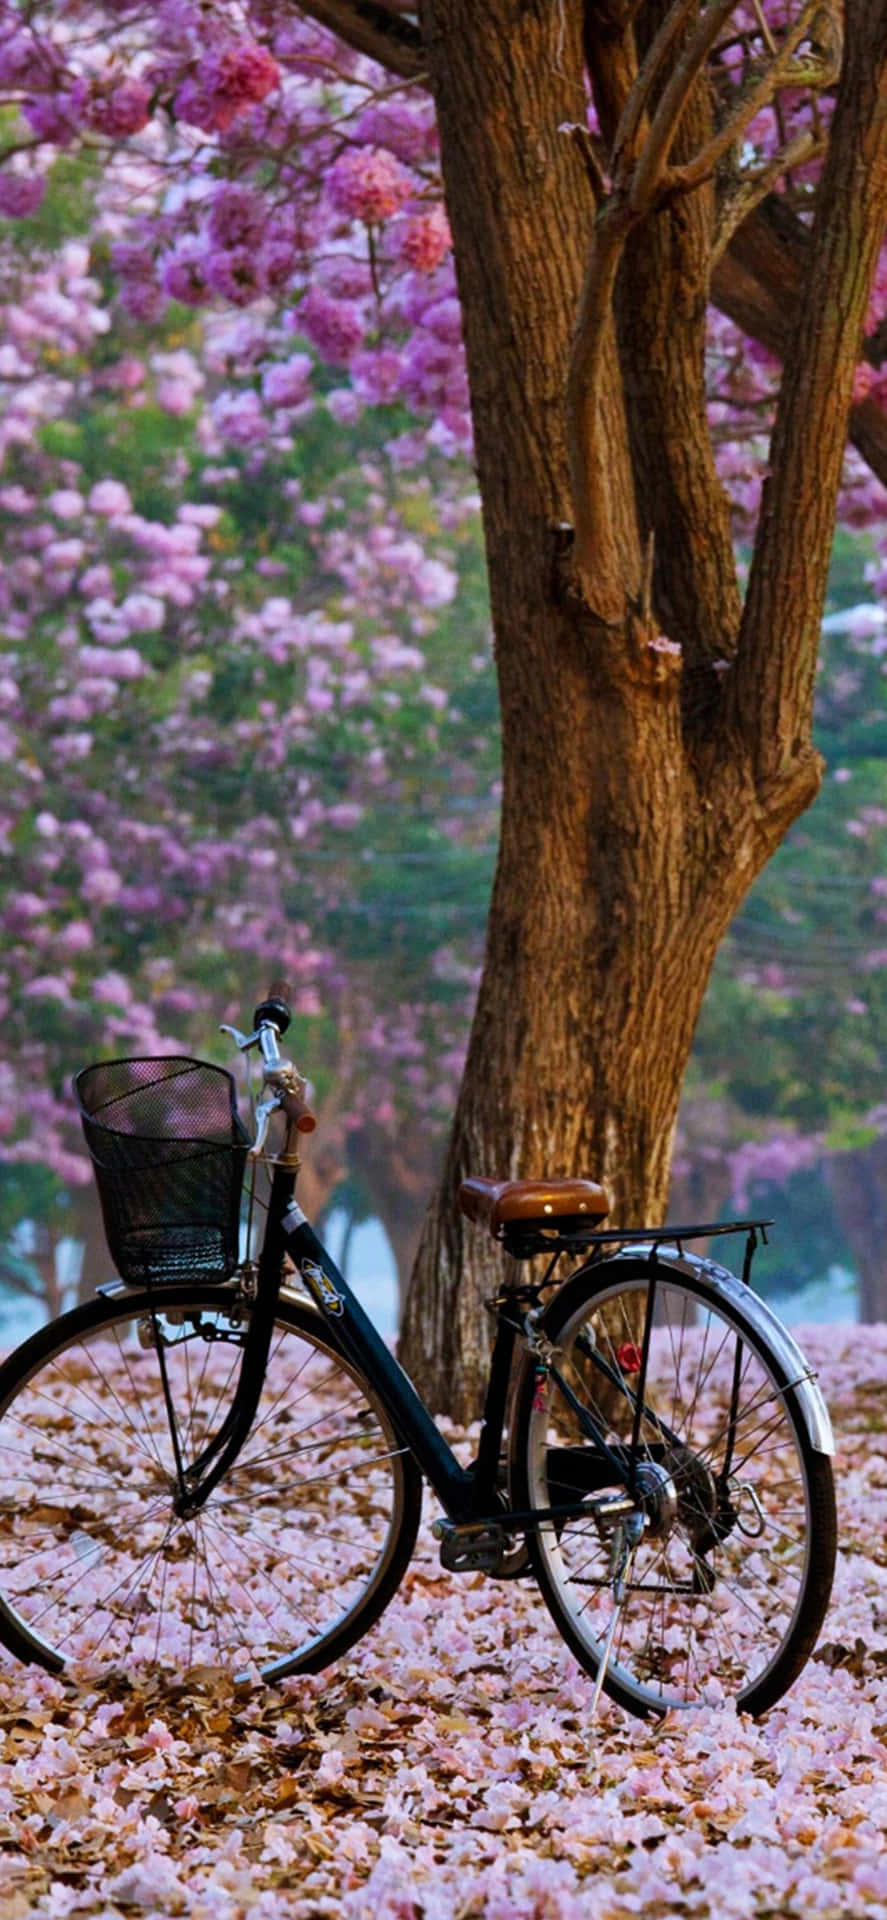 Enjoy a beautiful spring day with your Cute Spring Iphone! Wallpaper